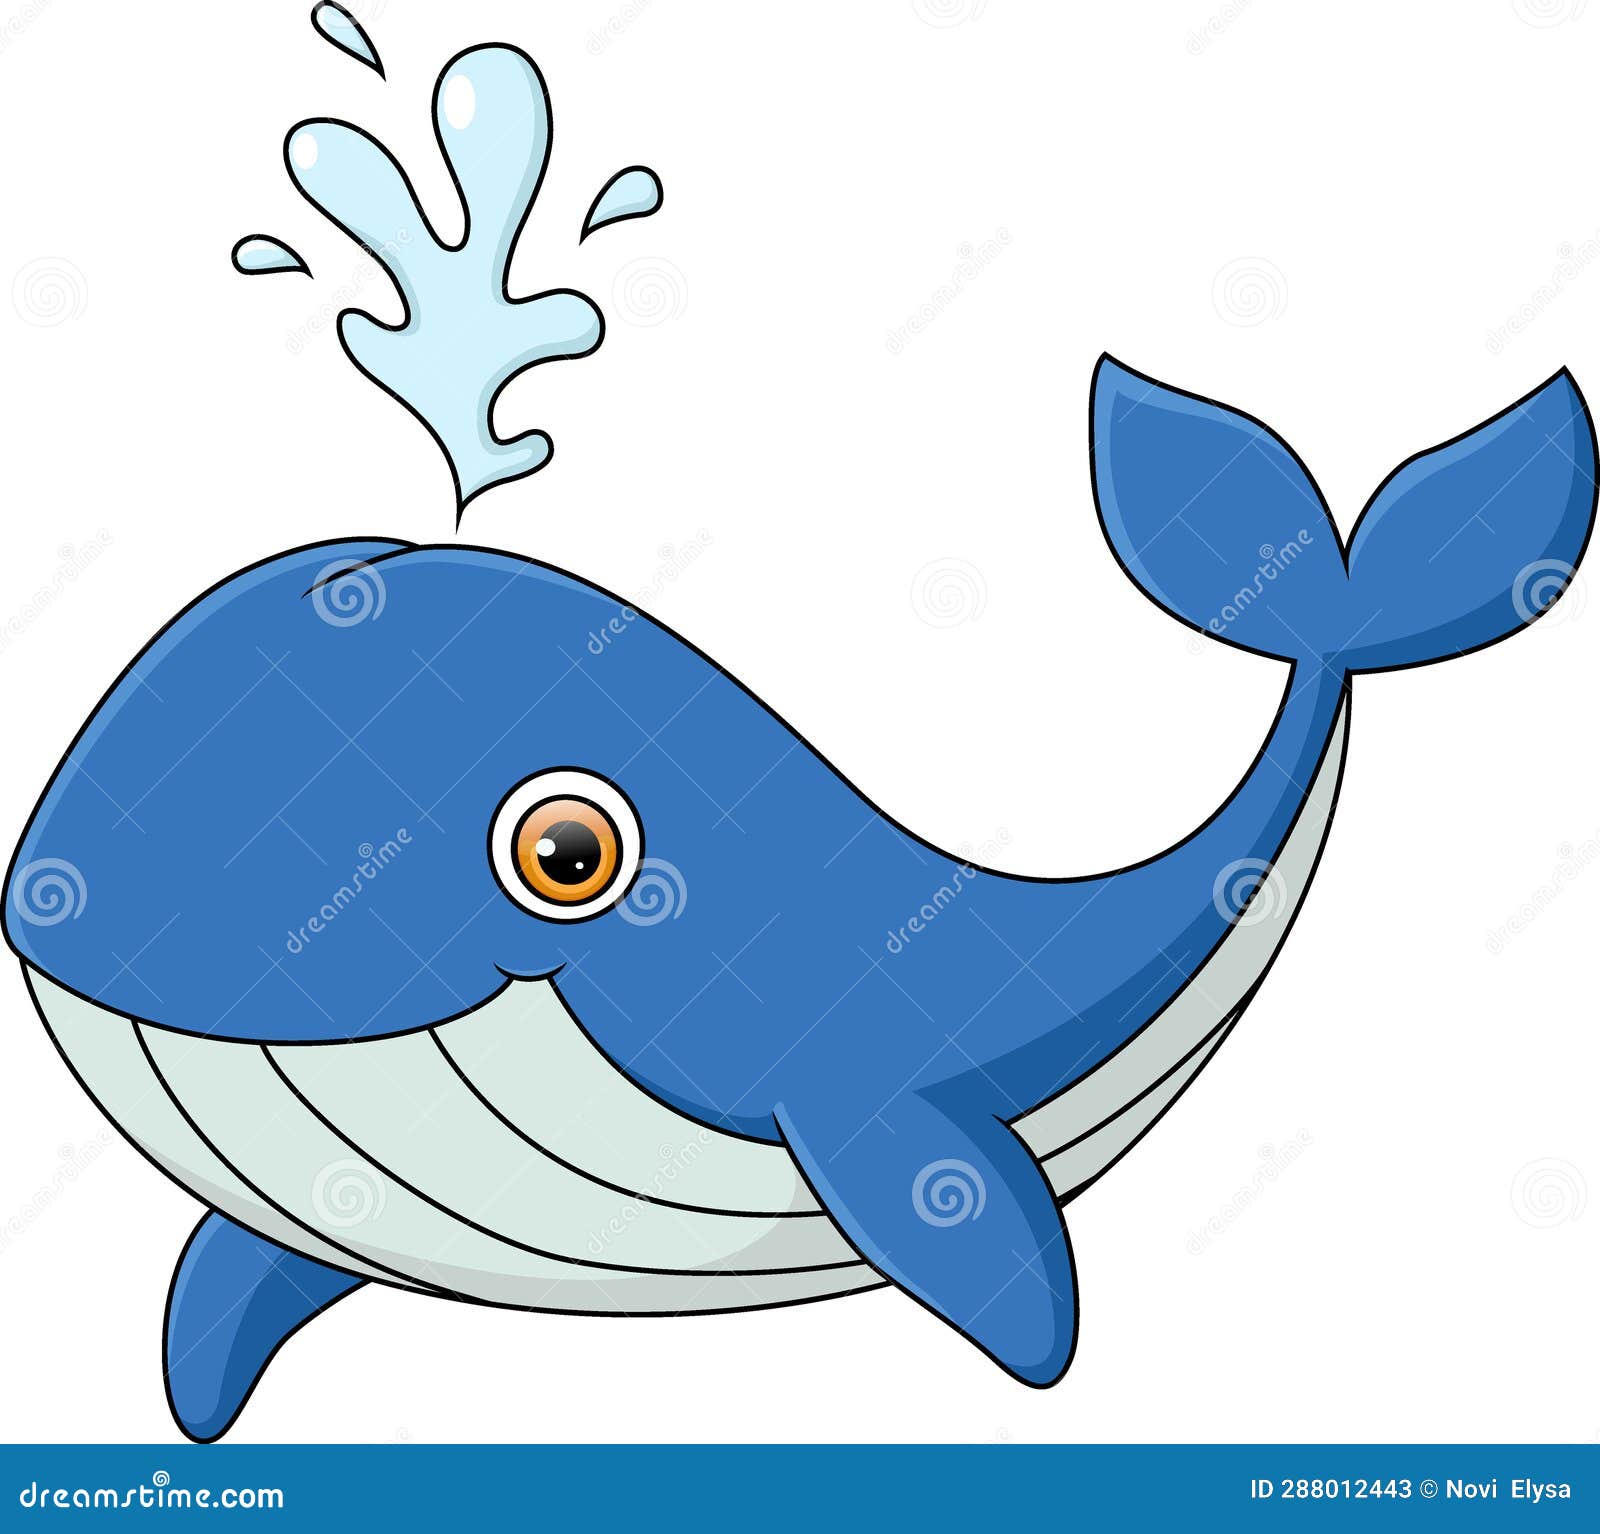 Cute Whale Cartoon on White Background Stock Vector - Illustration of ...